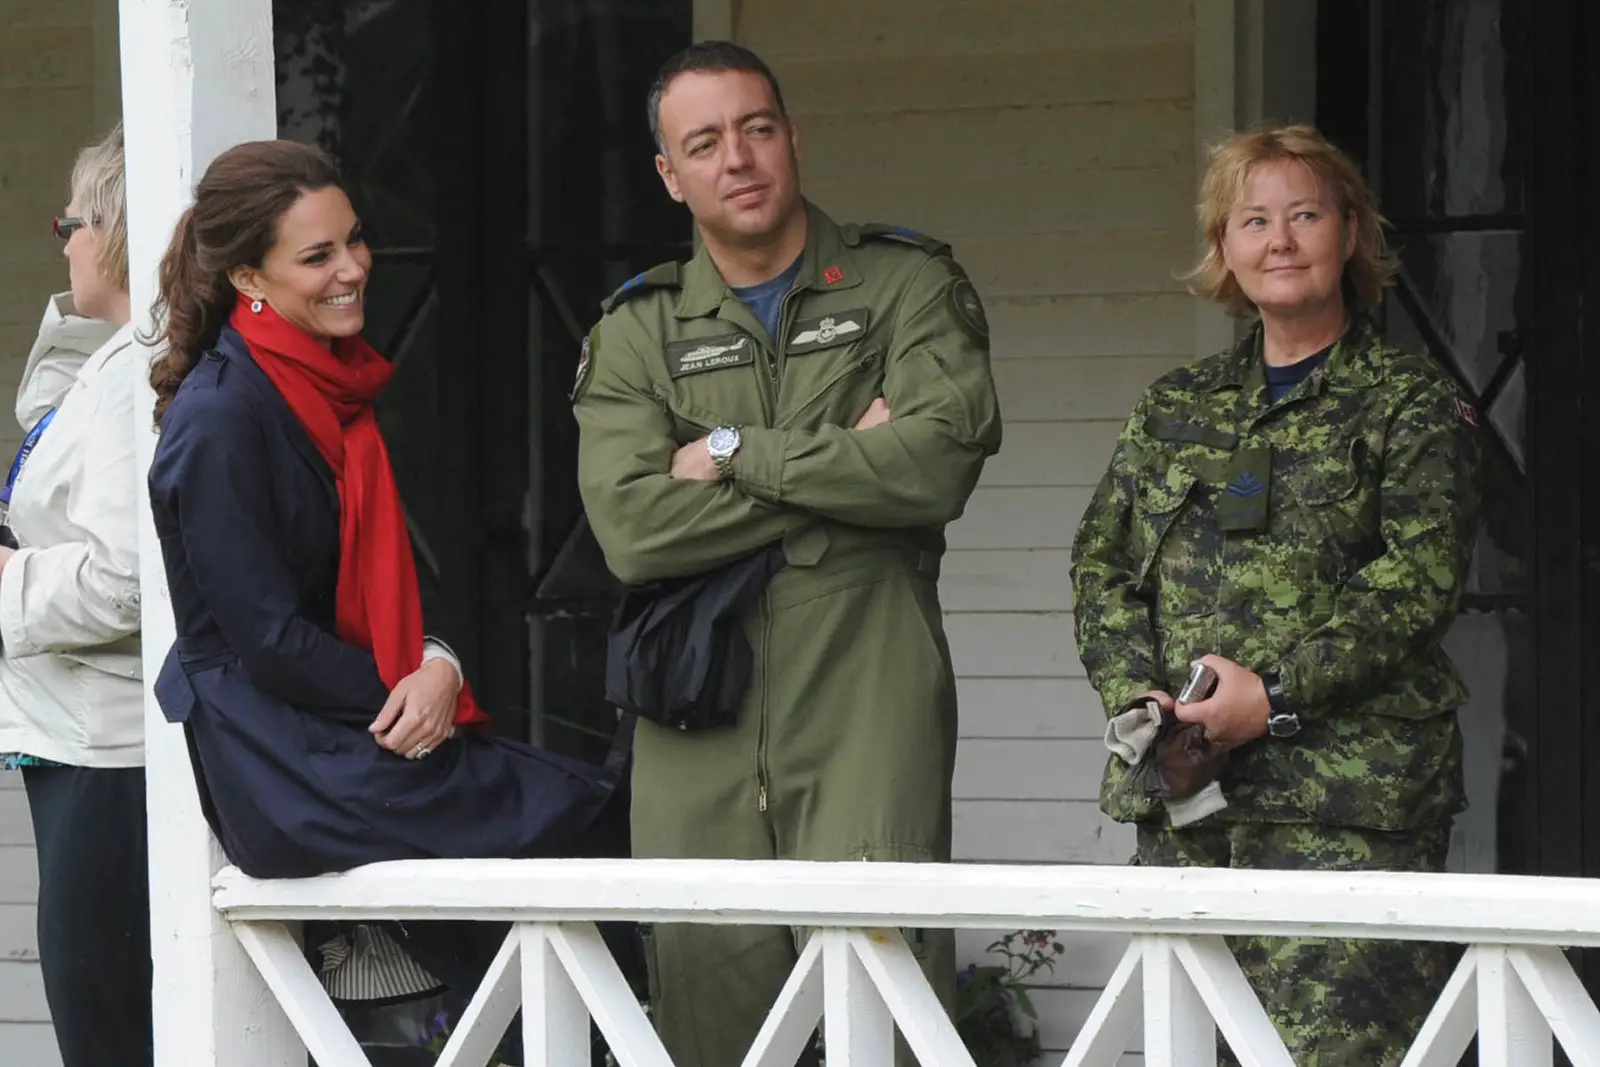 The Duchess of Cambridge watched Prince William participating in helicoptor rehearsal during canada tour 2011